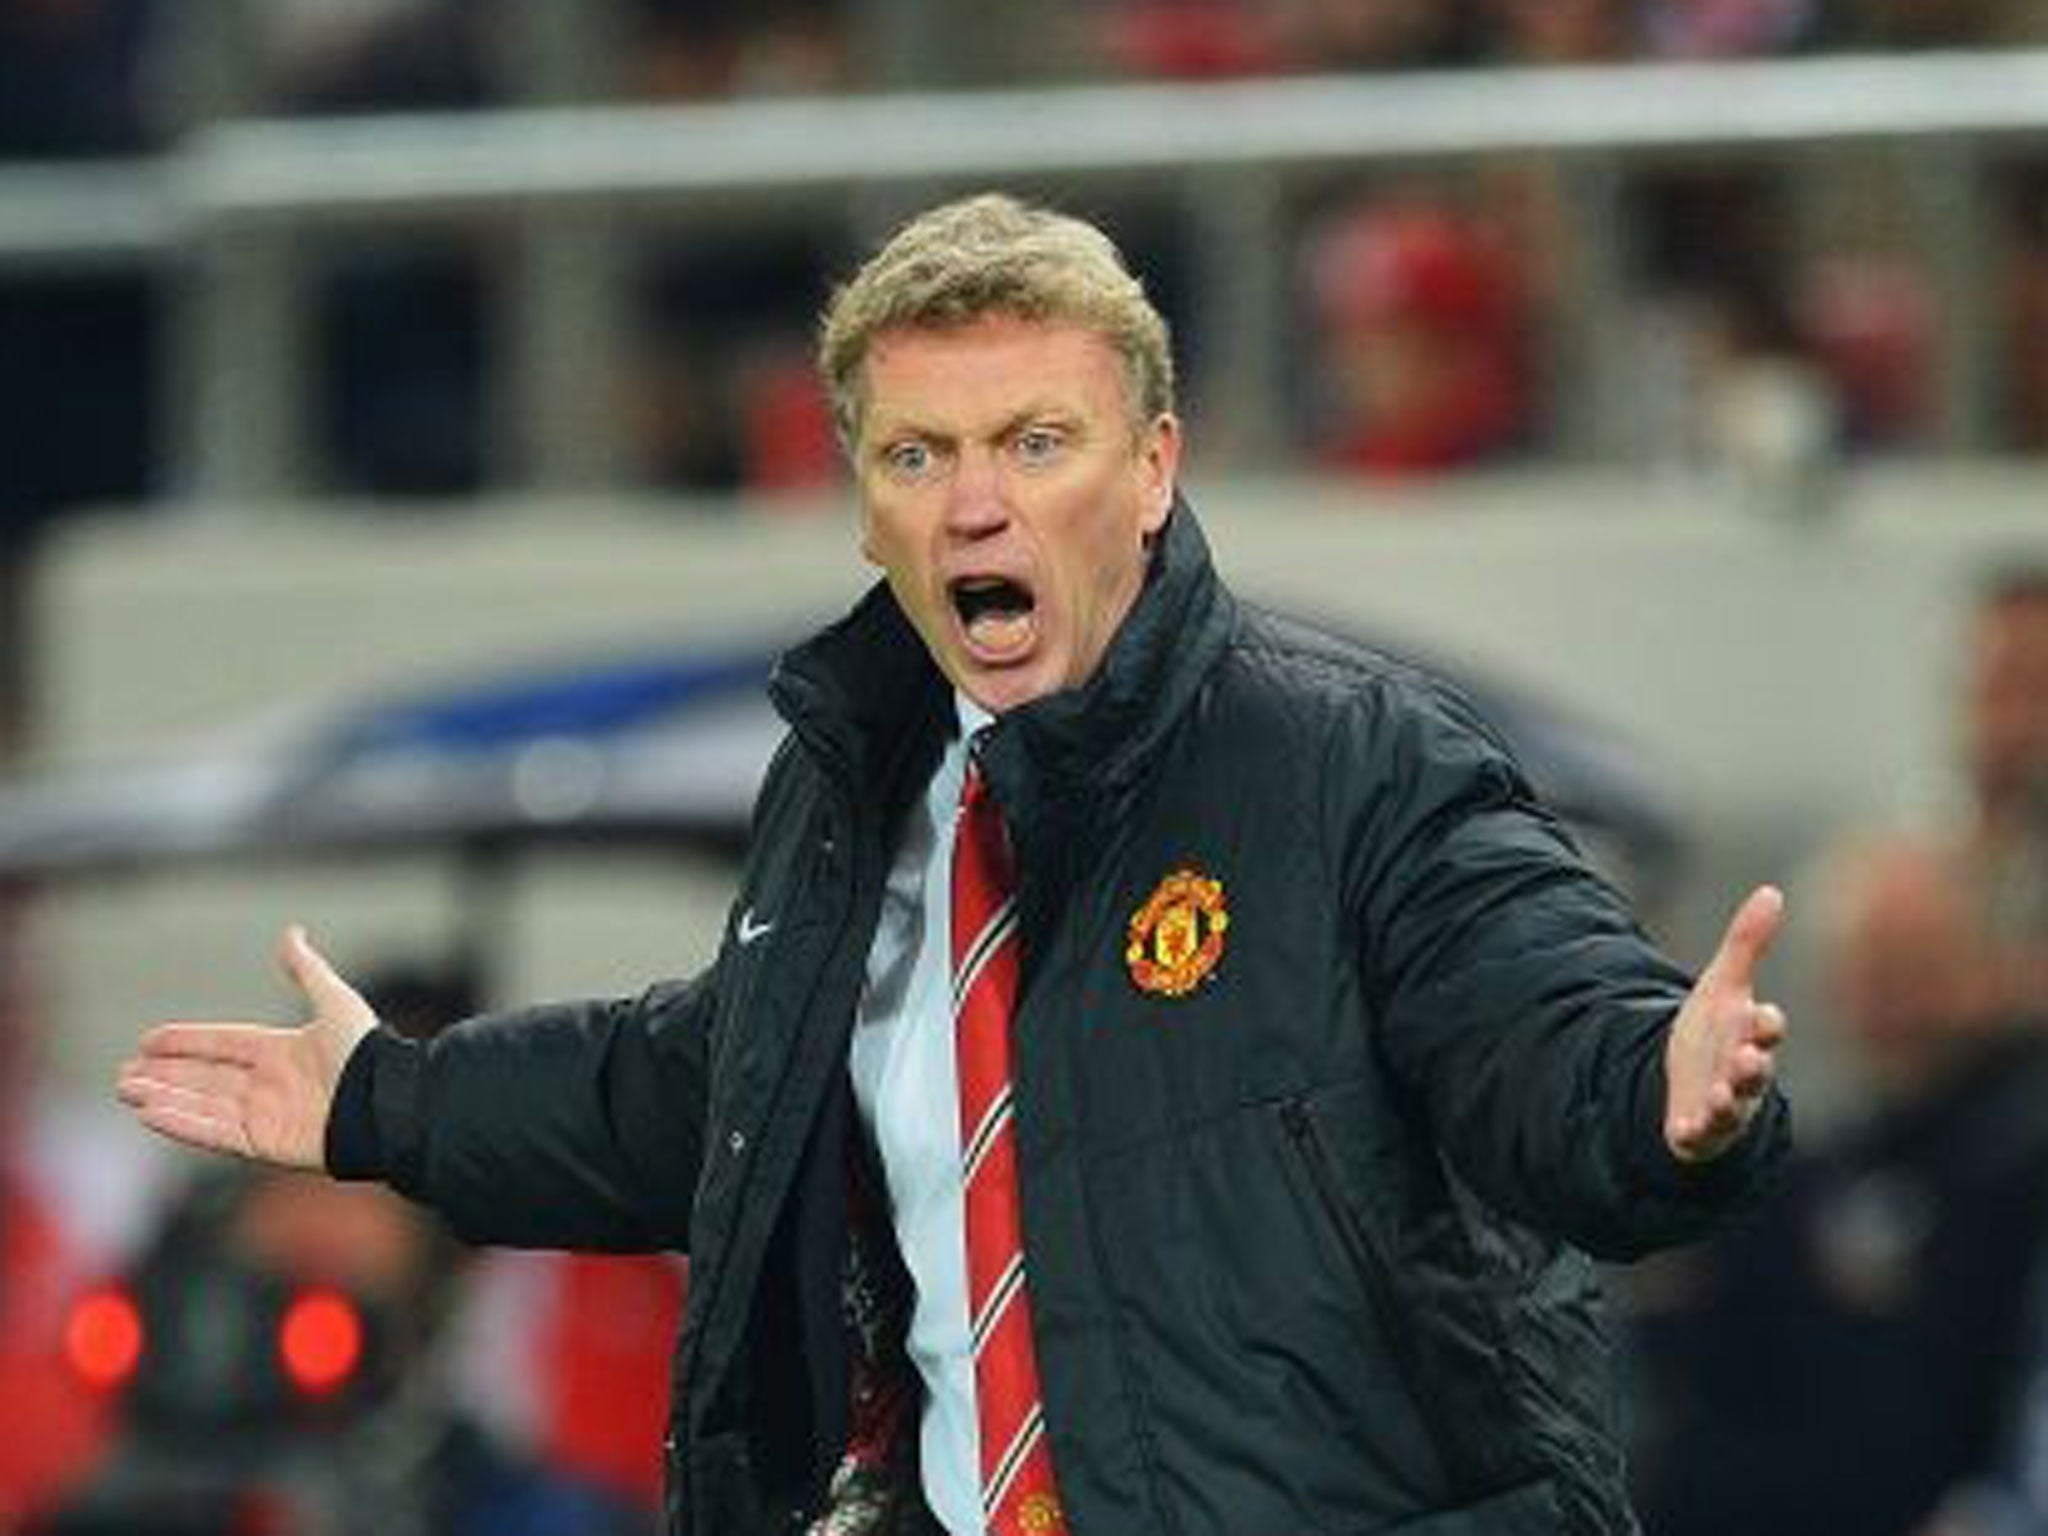 David Moyes reacts on the touchline during the UEFA Champions League Round of 16 first leg match between Olympiacos FC and Manchester United